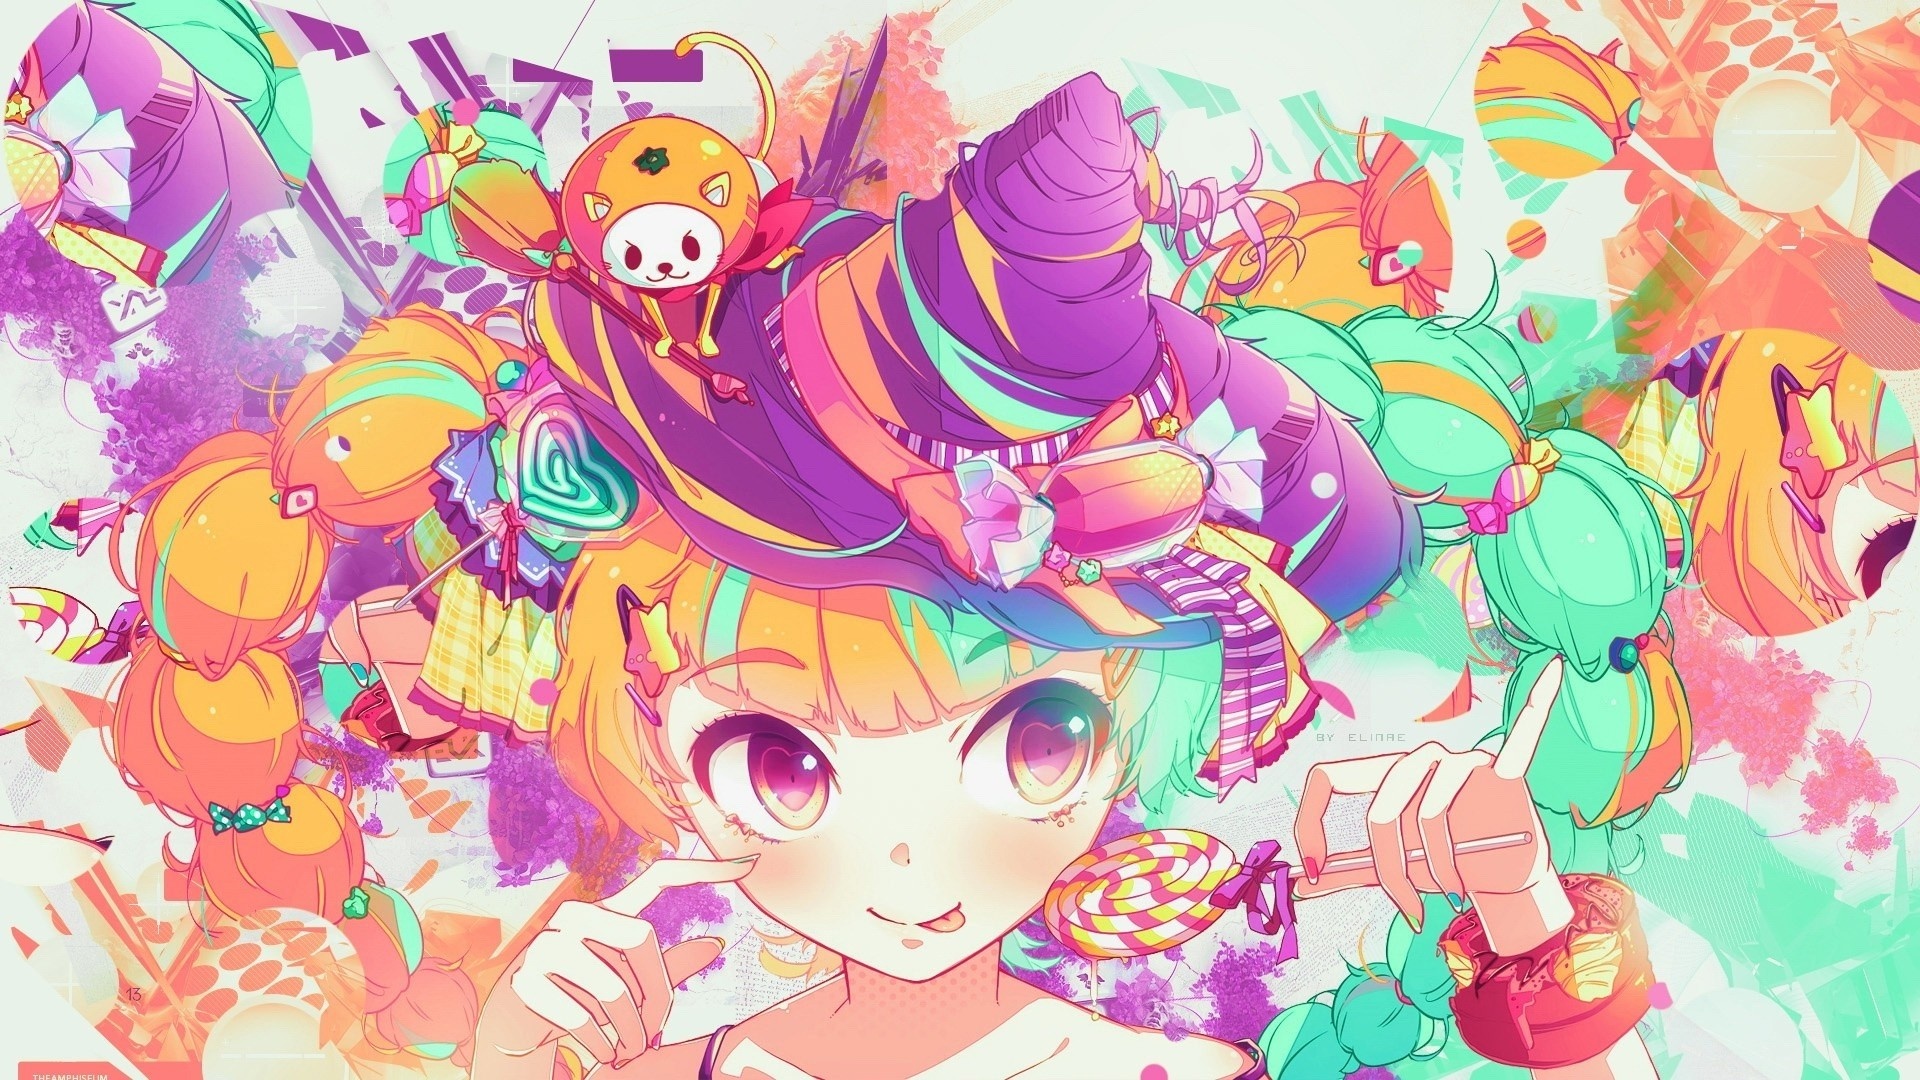 Kawaii wallpapers, Cute and delightful, Lovely and adorable, 1920x1080 Full HD Desktop